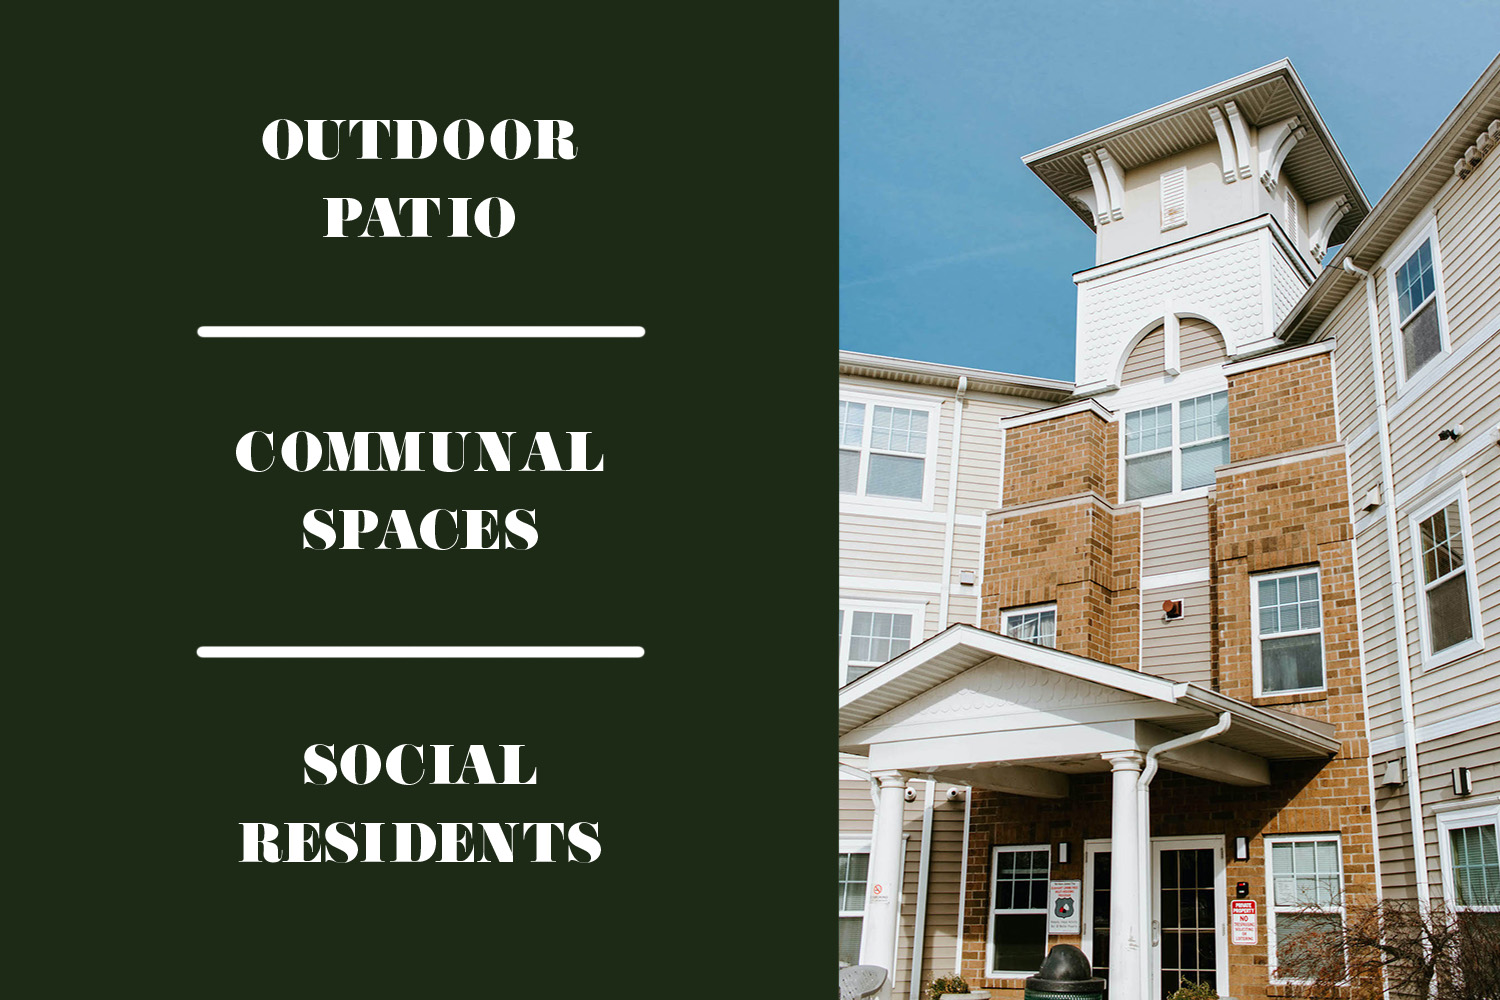 Water tower place outdoor patio communal spaces social residents